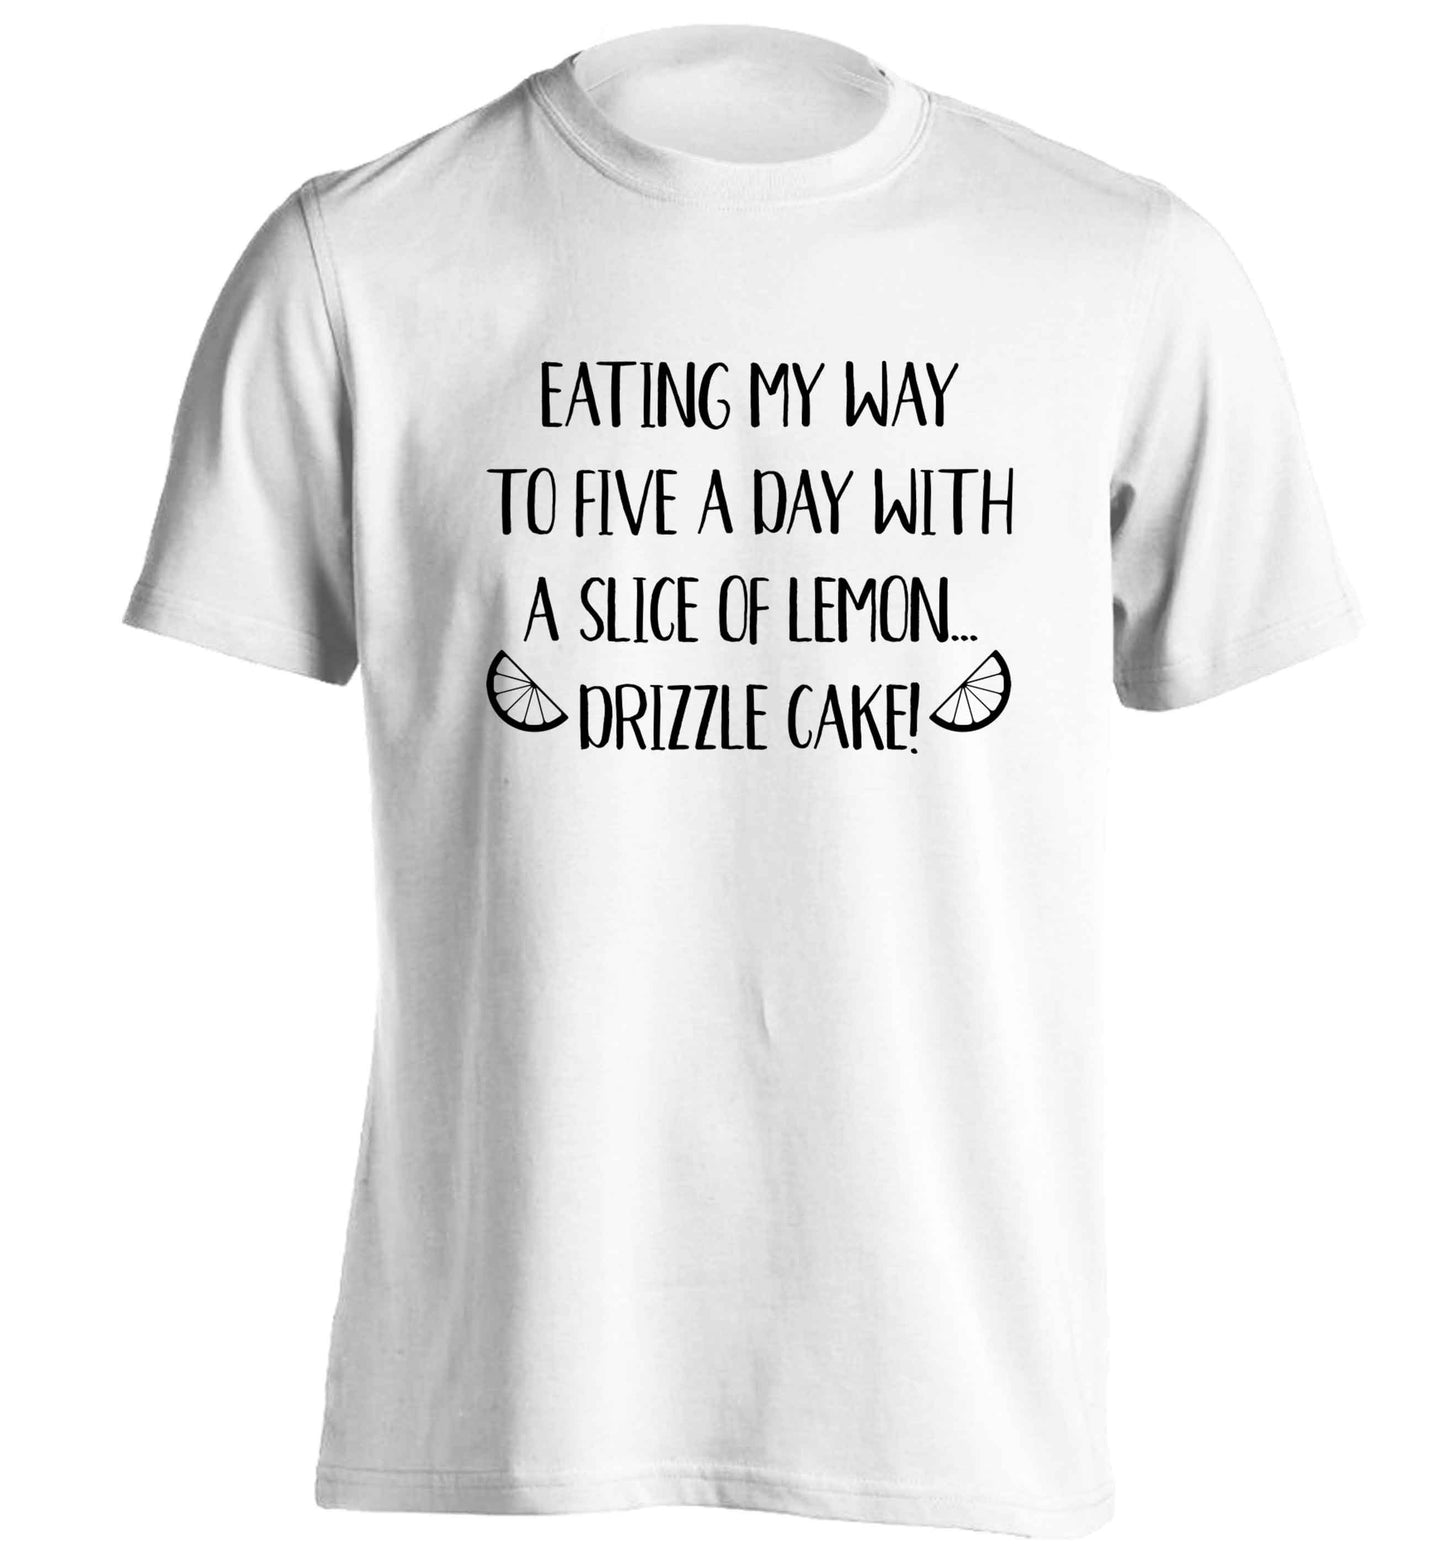 Eating my way to five a day with a slice of lemon drizzle cake day adults unisex white Tshirt 2XL